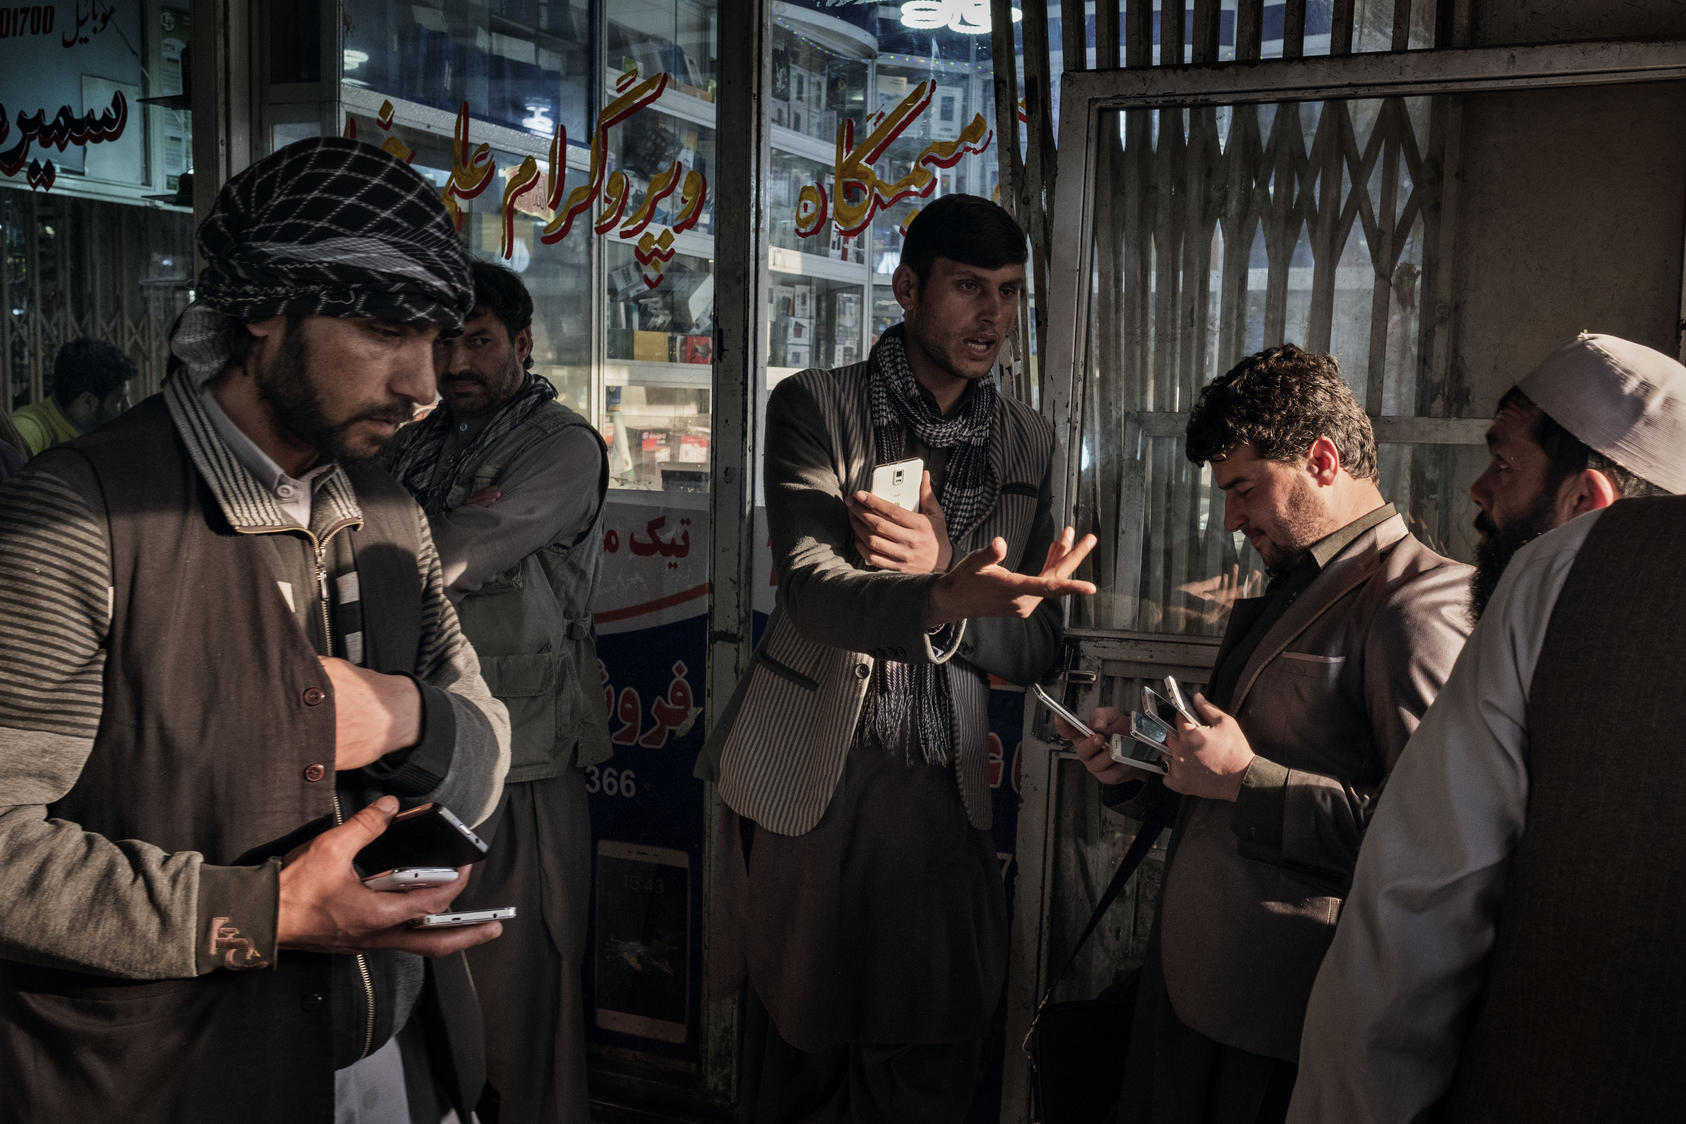 Afghans buy and sell used and new mobile phones, SIM cards and phone credit cards at a market in Kabul, Afghanistan, March 31, 2016. The local telecommunications industry was a rare economic bright spot, but losses are now mounting as new taxes are imposed and a dwindling pool of customers as American troops and foreign contractors leave. 